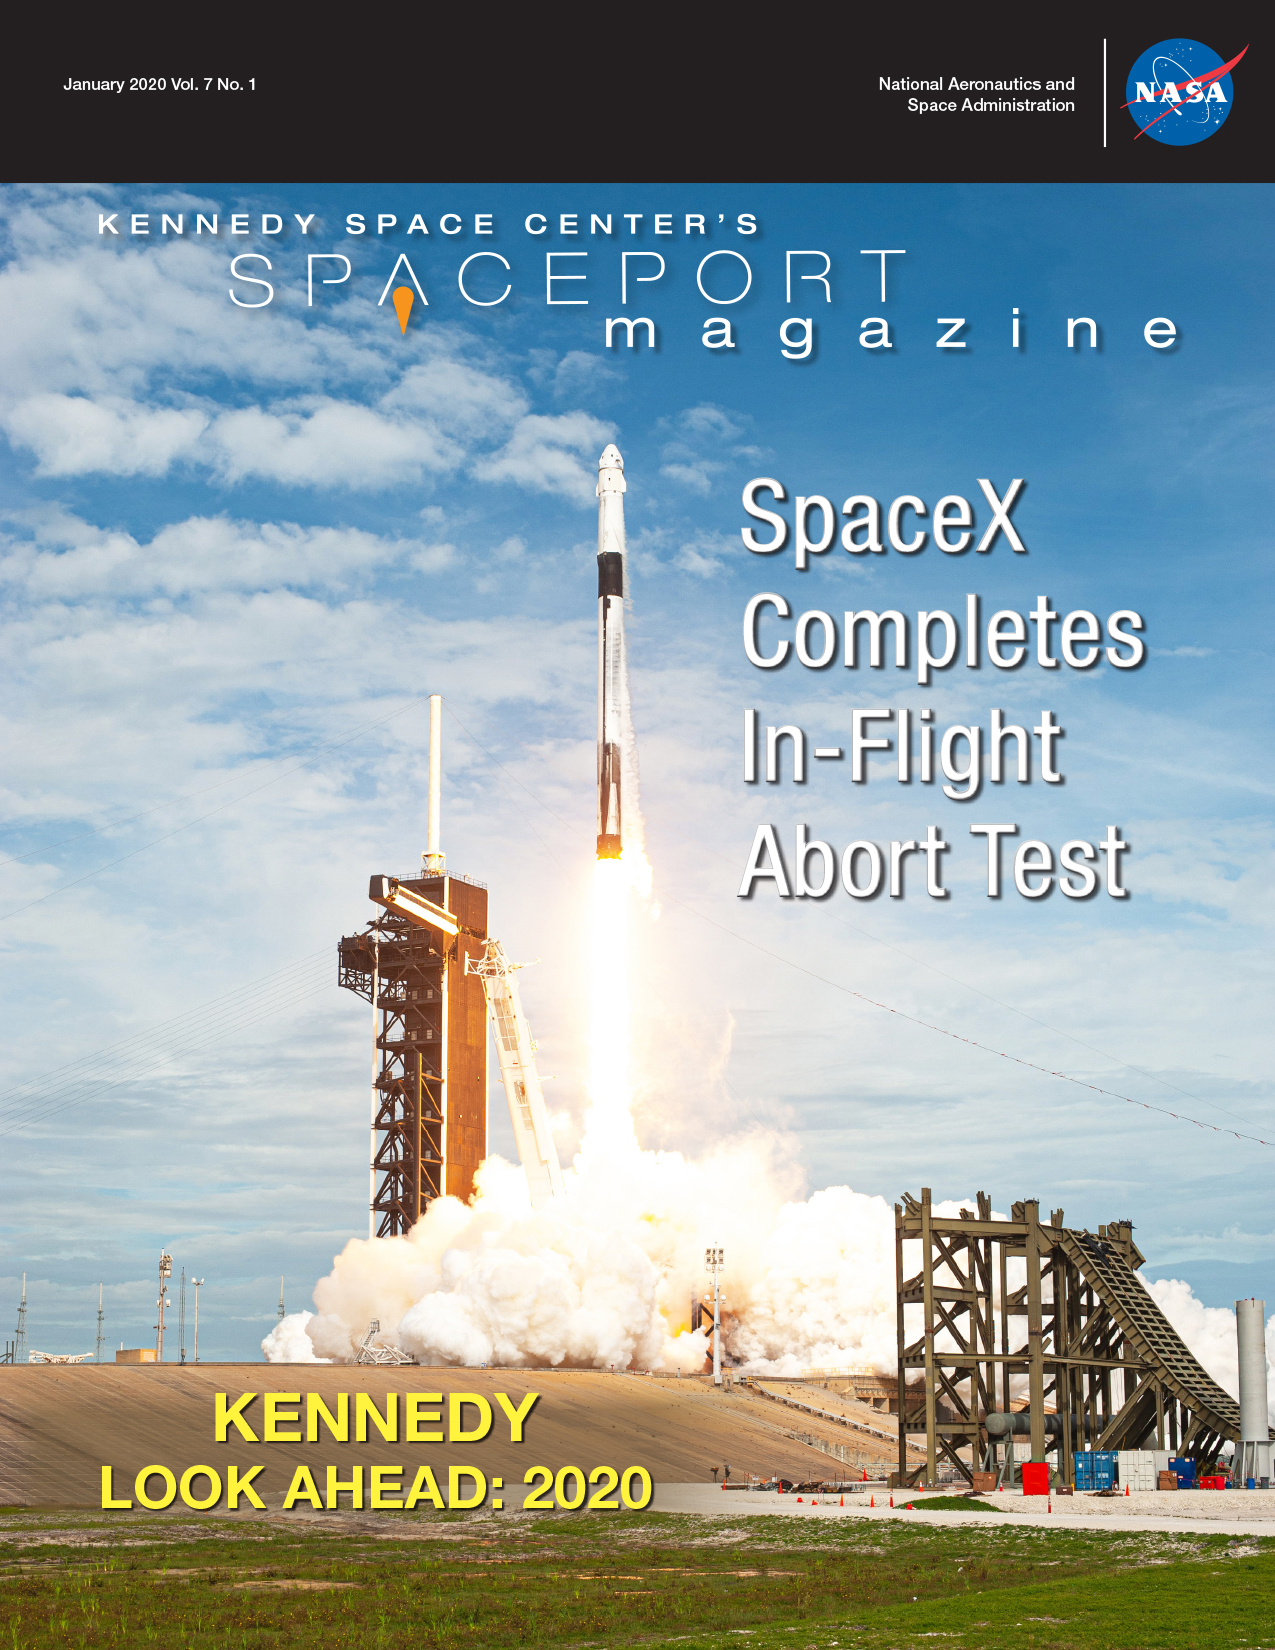 Cover of Spaceport Magazine, January/February 2020 issue, featuring SpaceX In-Flight Abort Test.